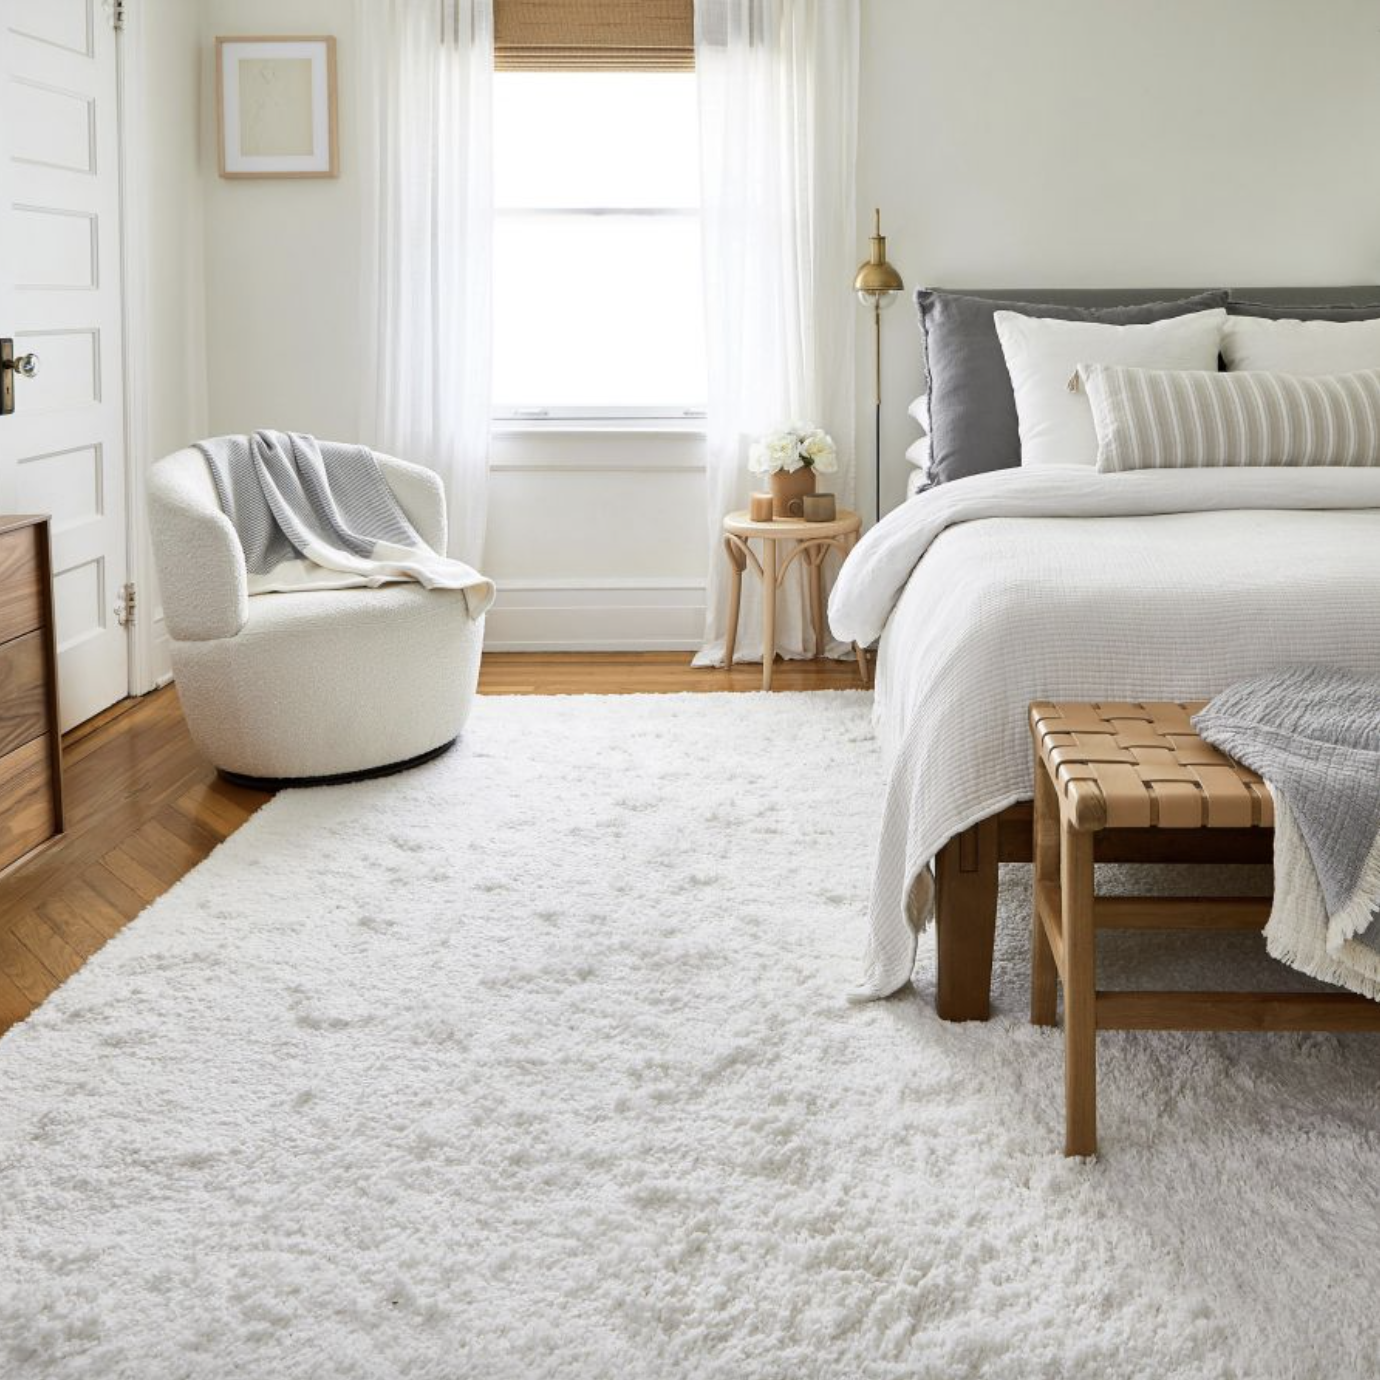 a white shaggy rug in a bedroom